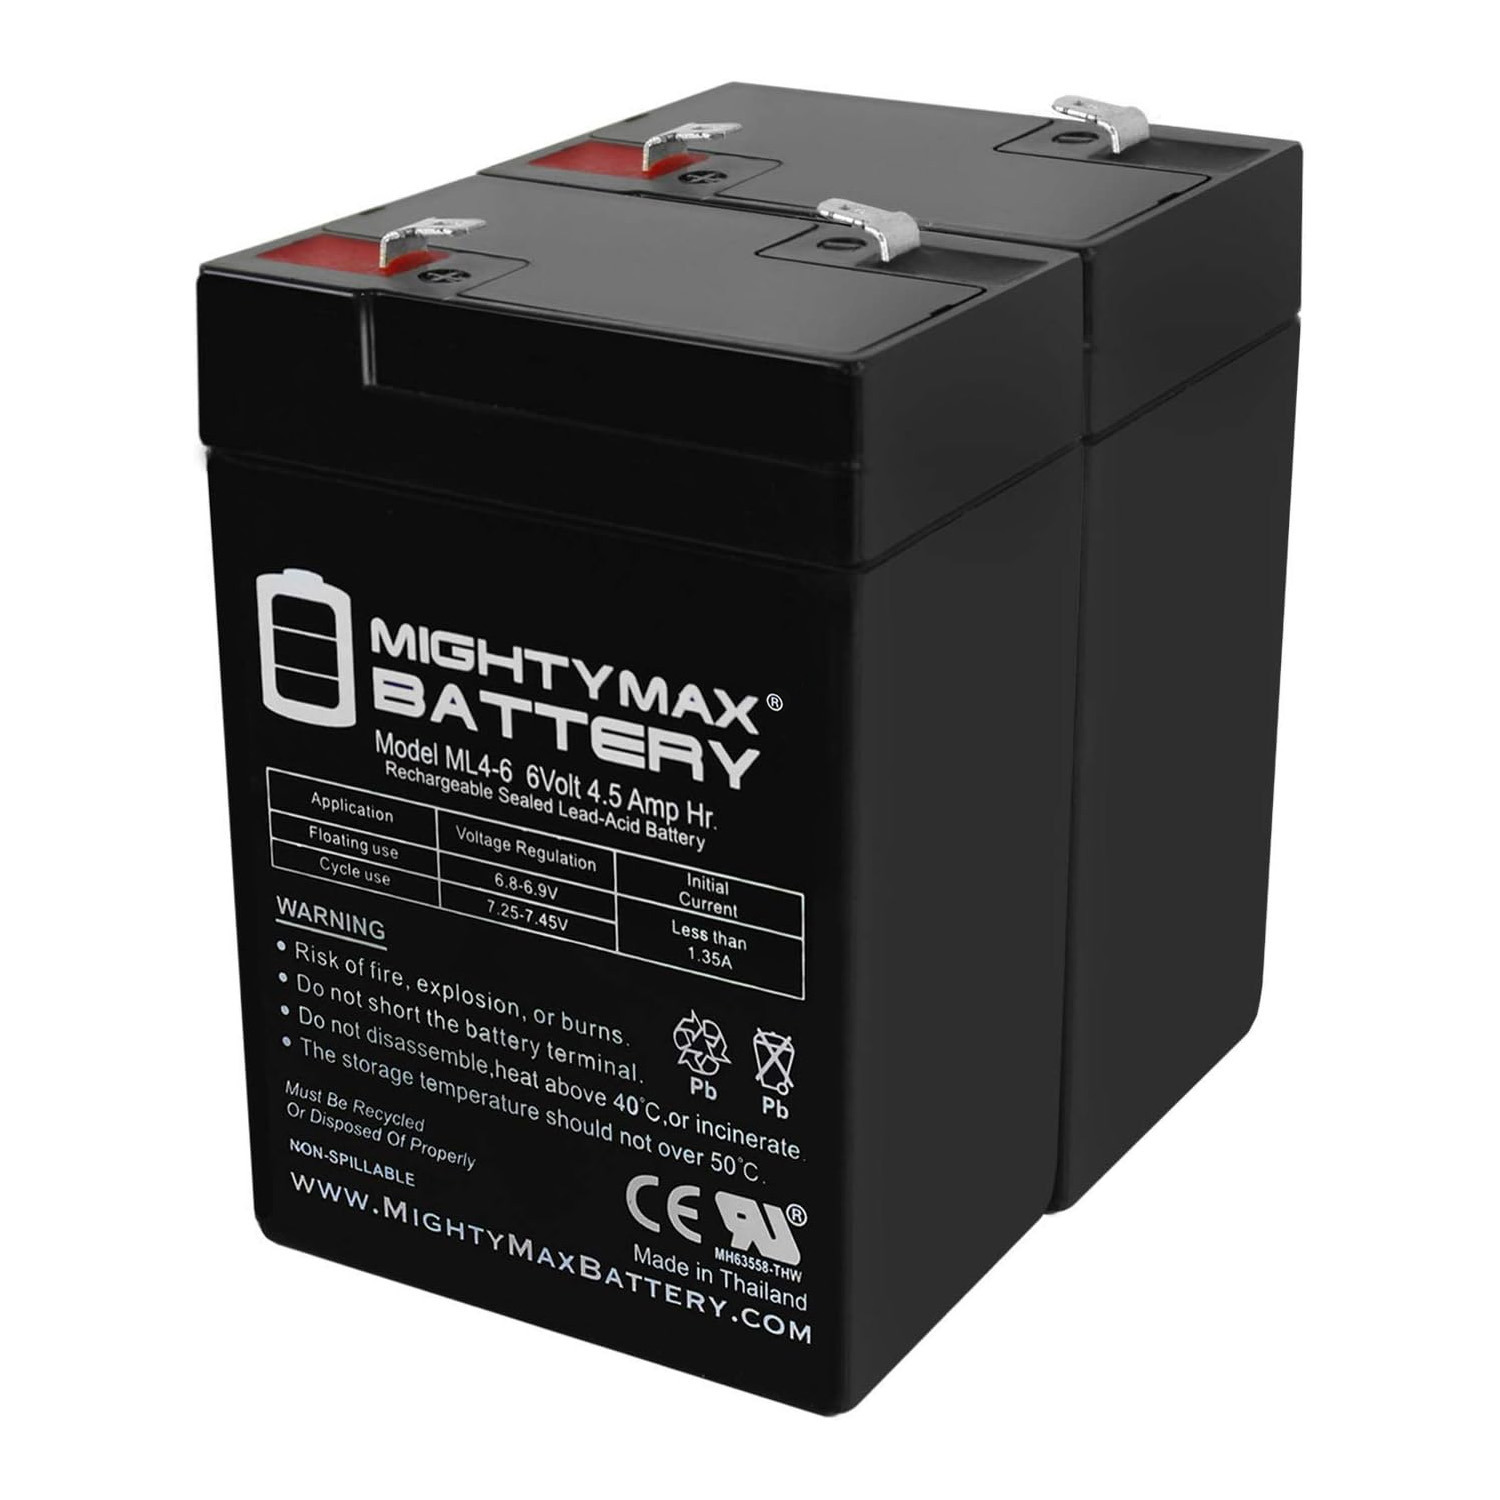 6V 4.5AH SLA Replacement Battery for Chloride 1000010148 - 2 Pack